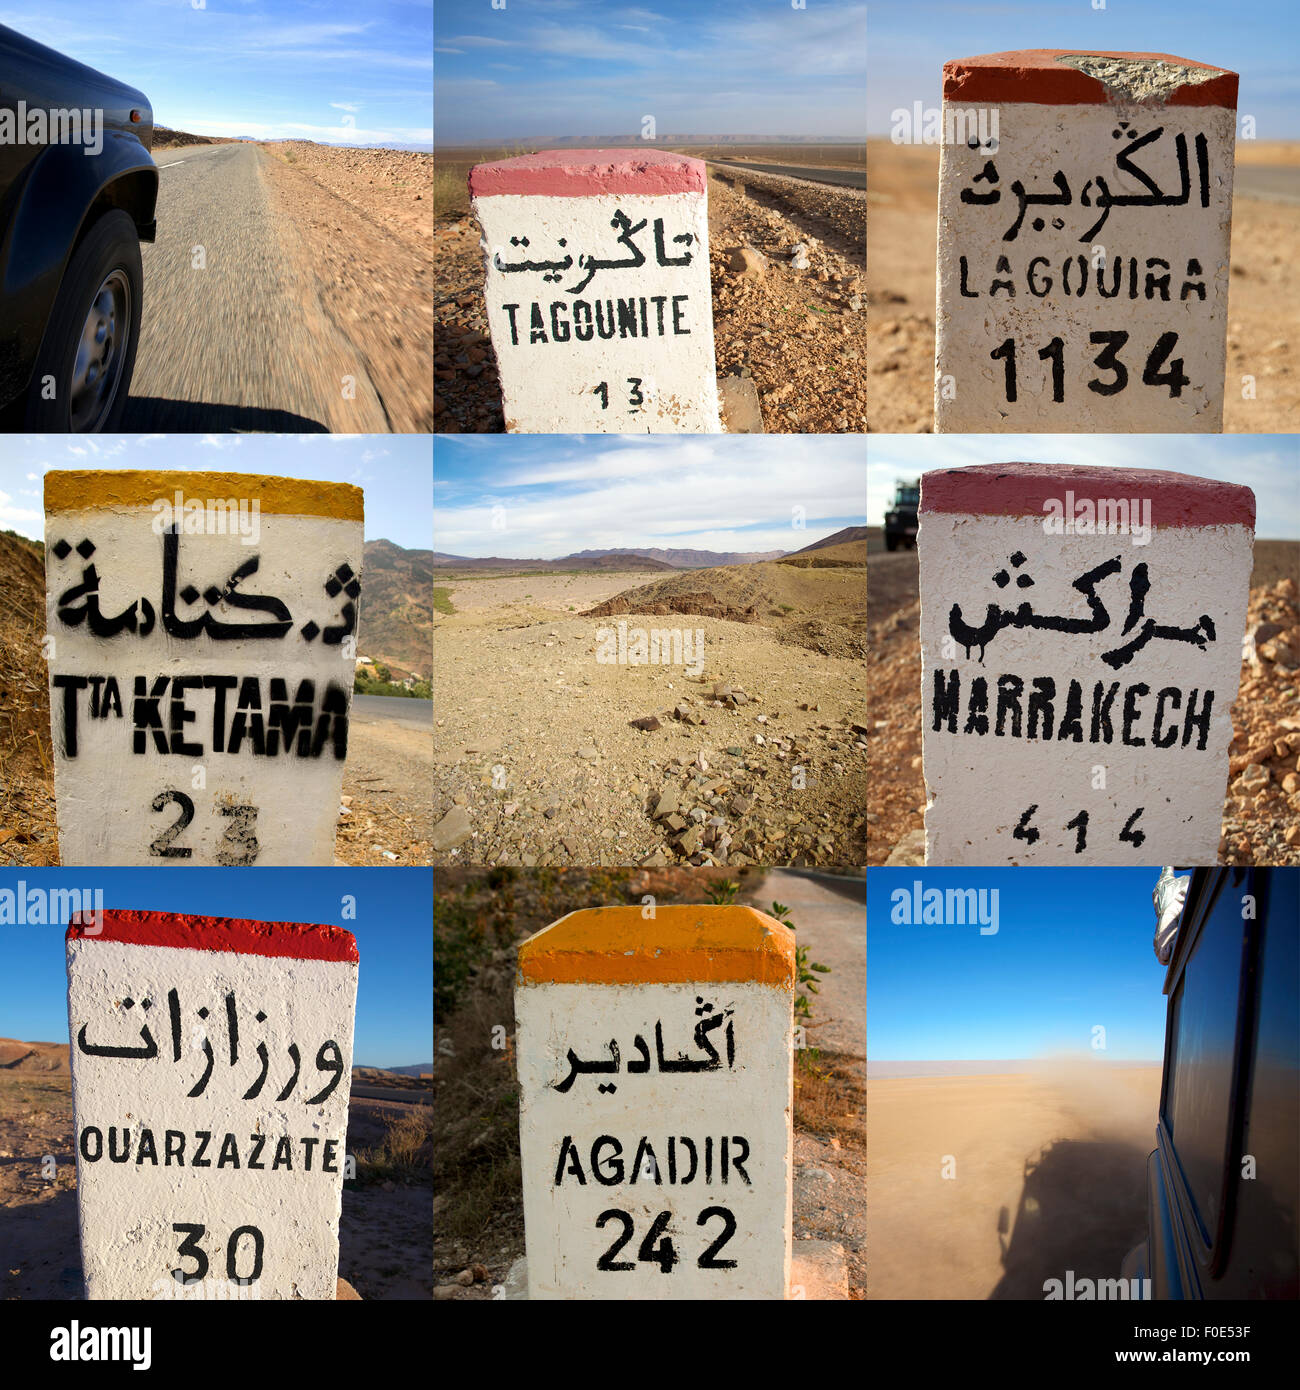 Composition of 9 images in a square format including close-up of road signs in Morocco. Stock Photo